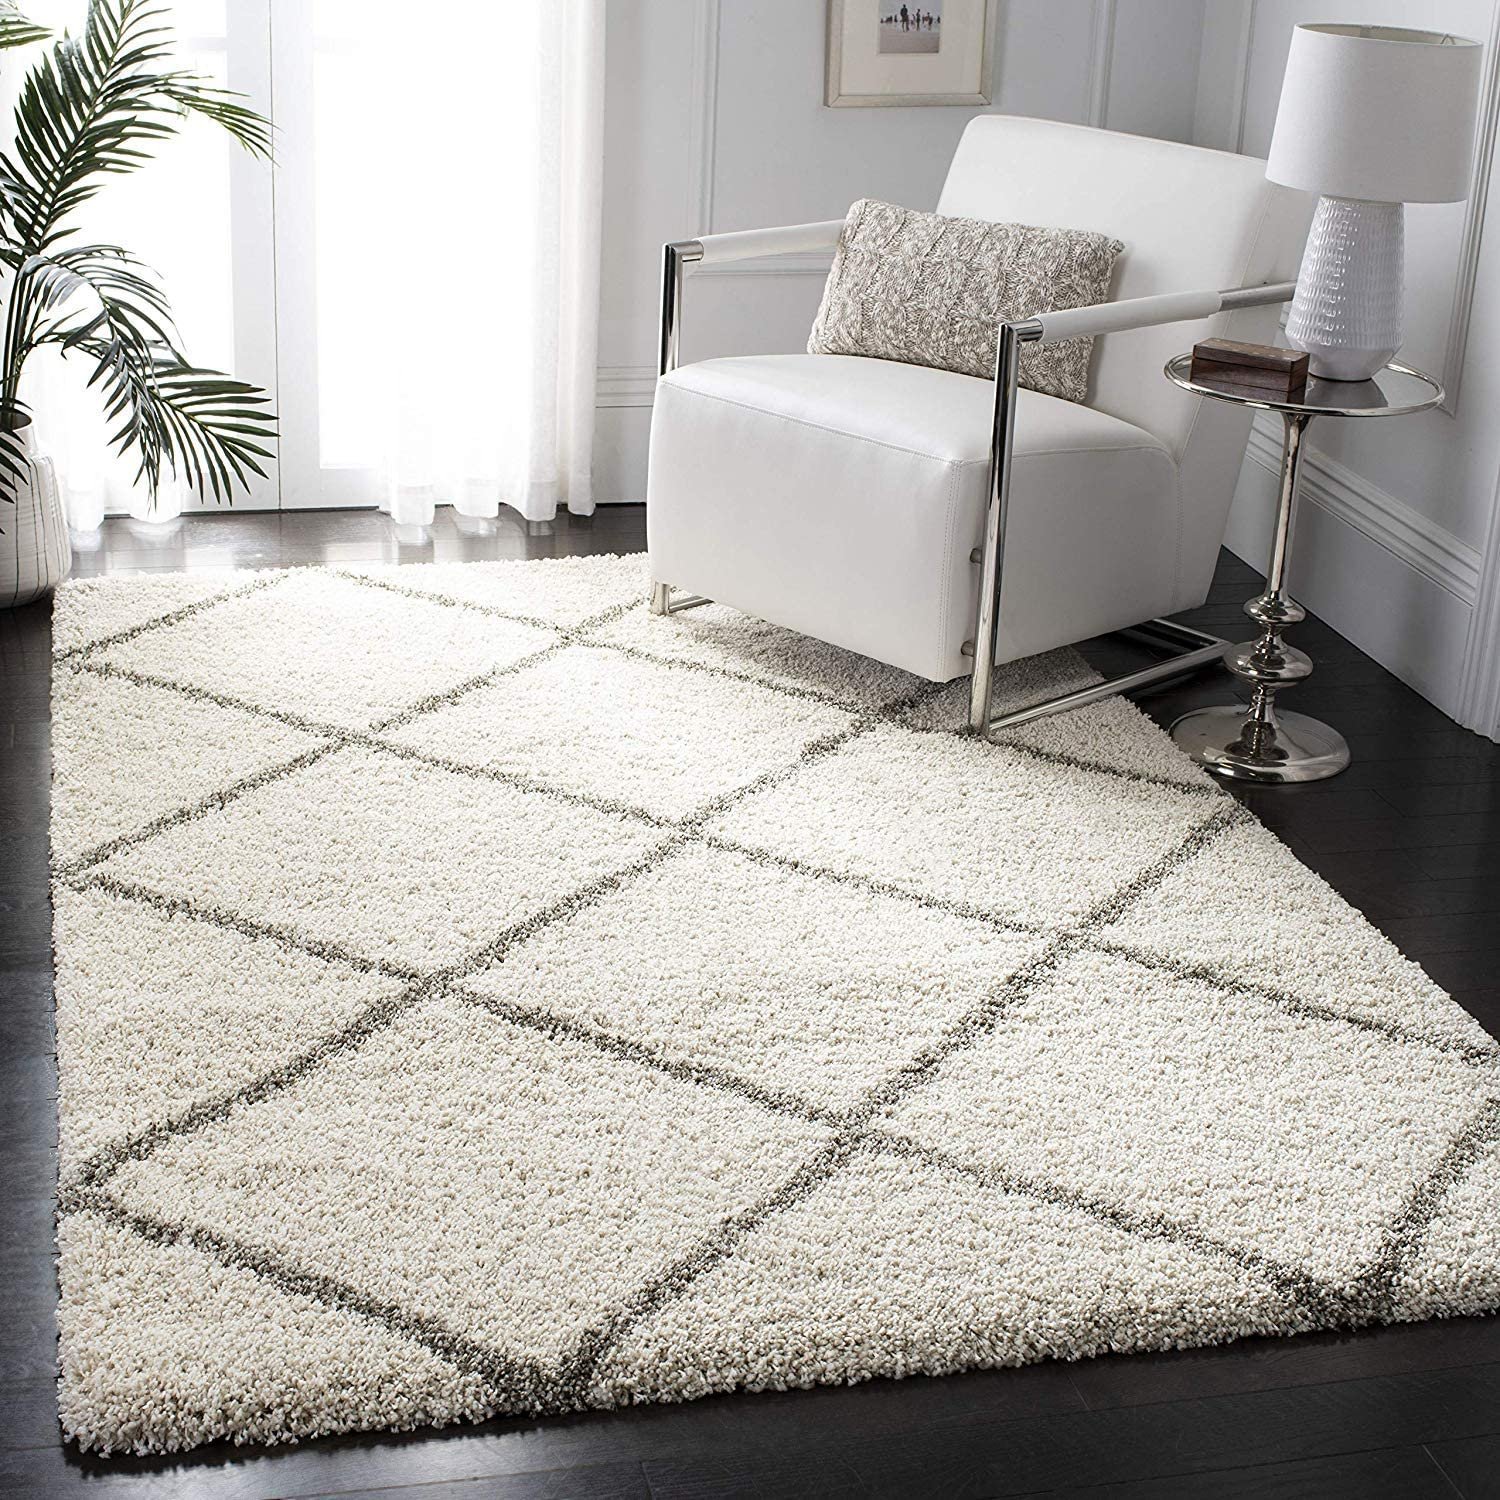 Thick Area Rug